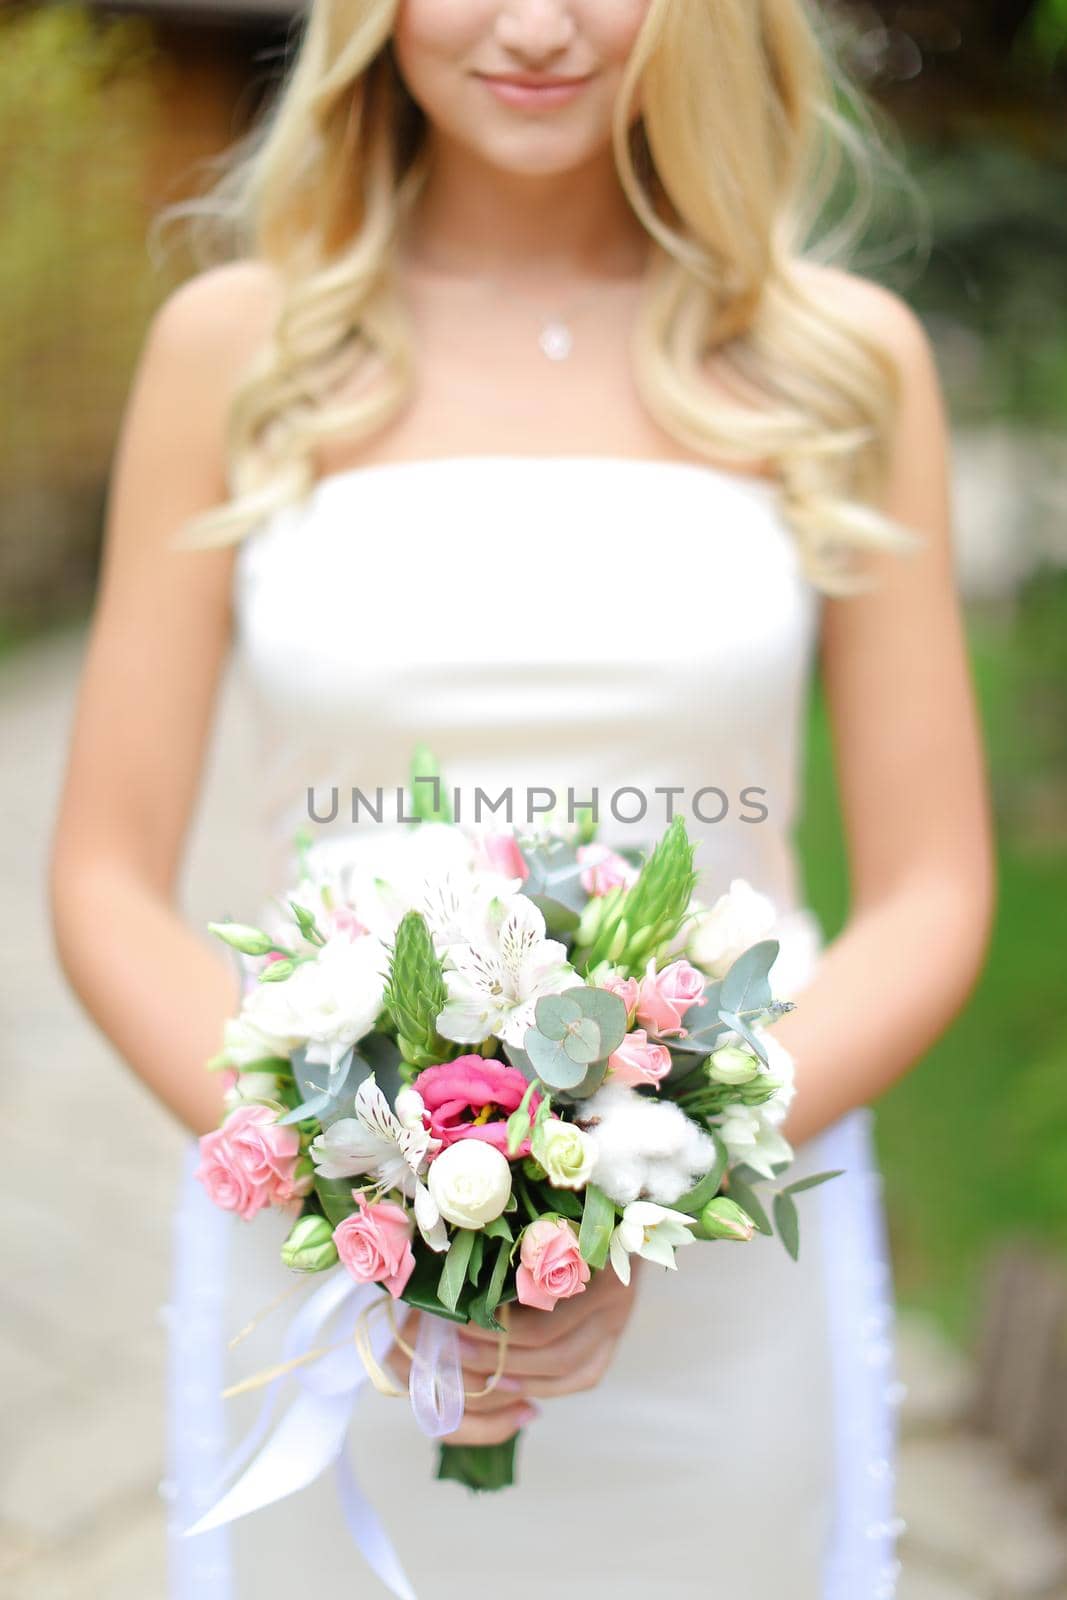 Young blonde bride keeping bouquet of flowers. Concept of wedding and floristic art.